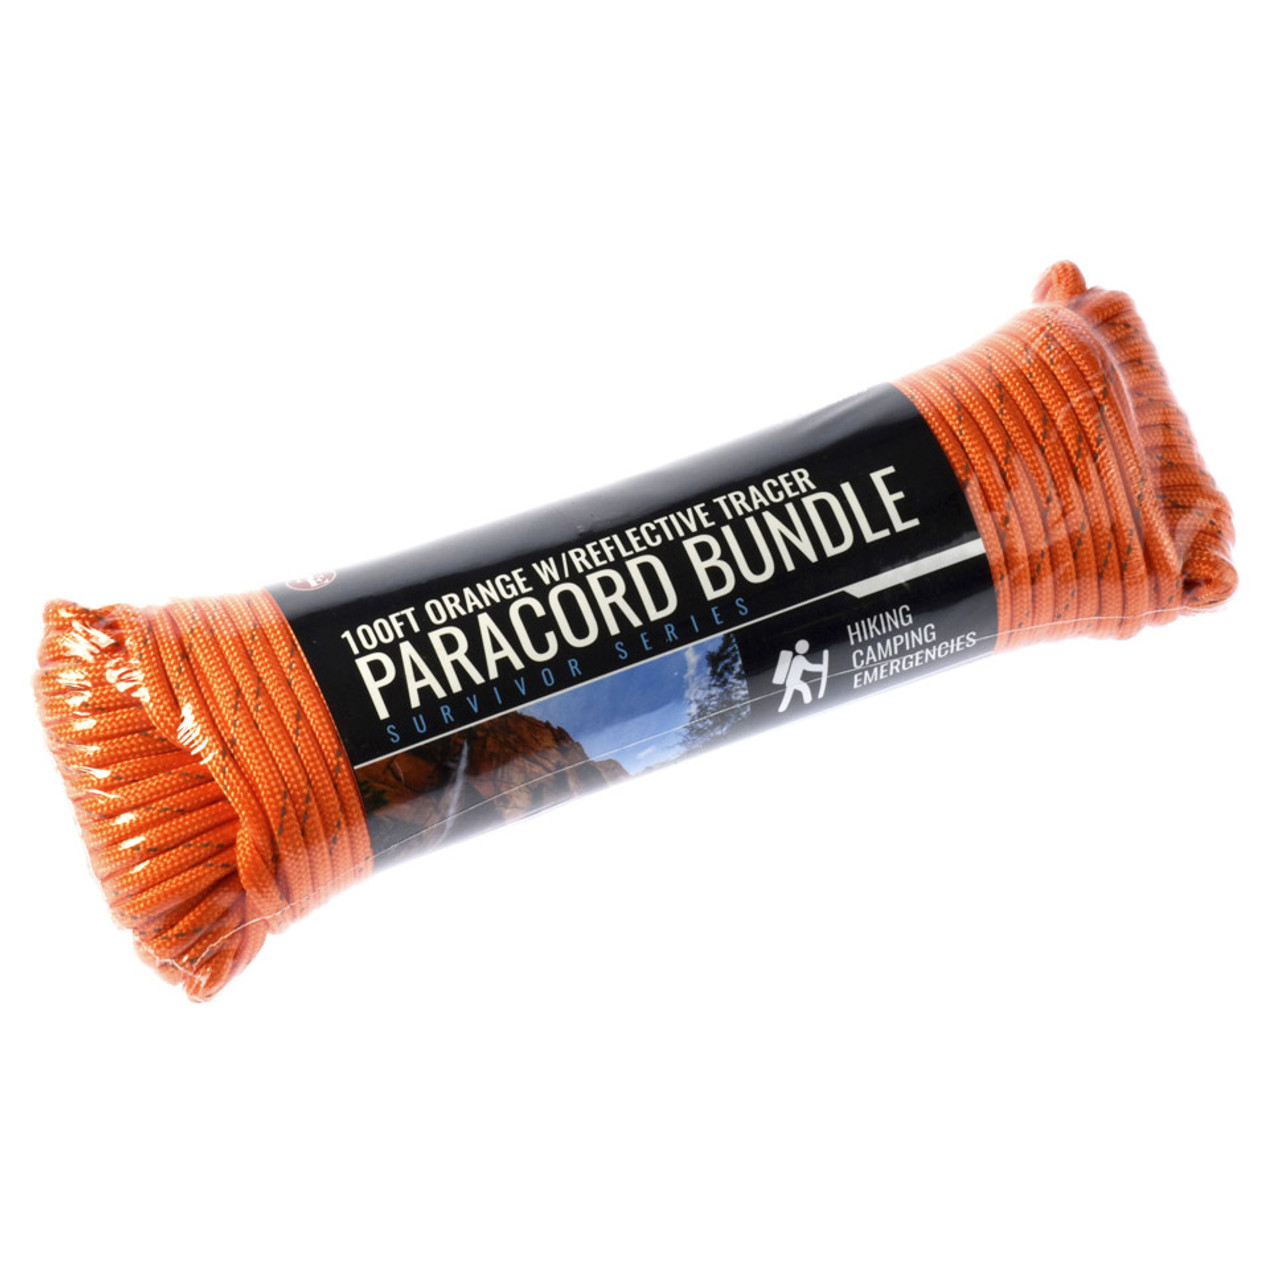 100' x 5/32 Paracord 7 Strand, Orange W/ Reflective Tracer, Pull Strength  550 LBS - Camping Tools Supplies